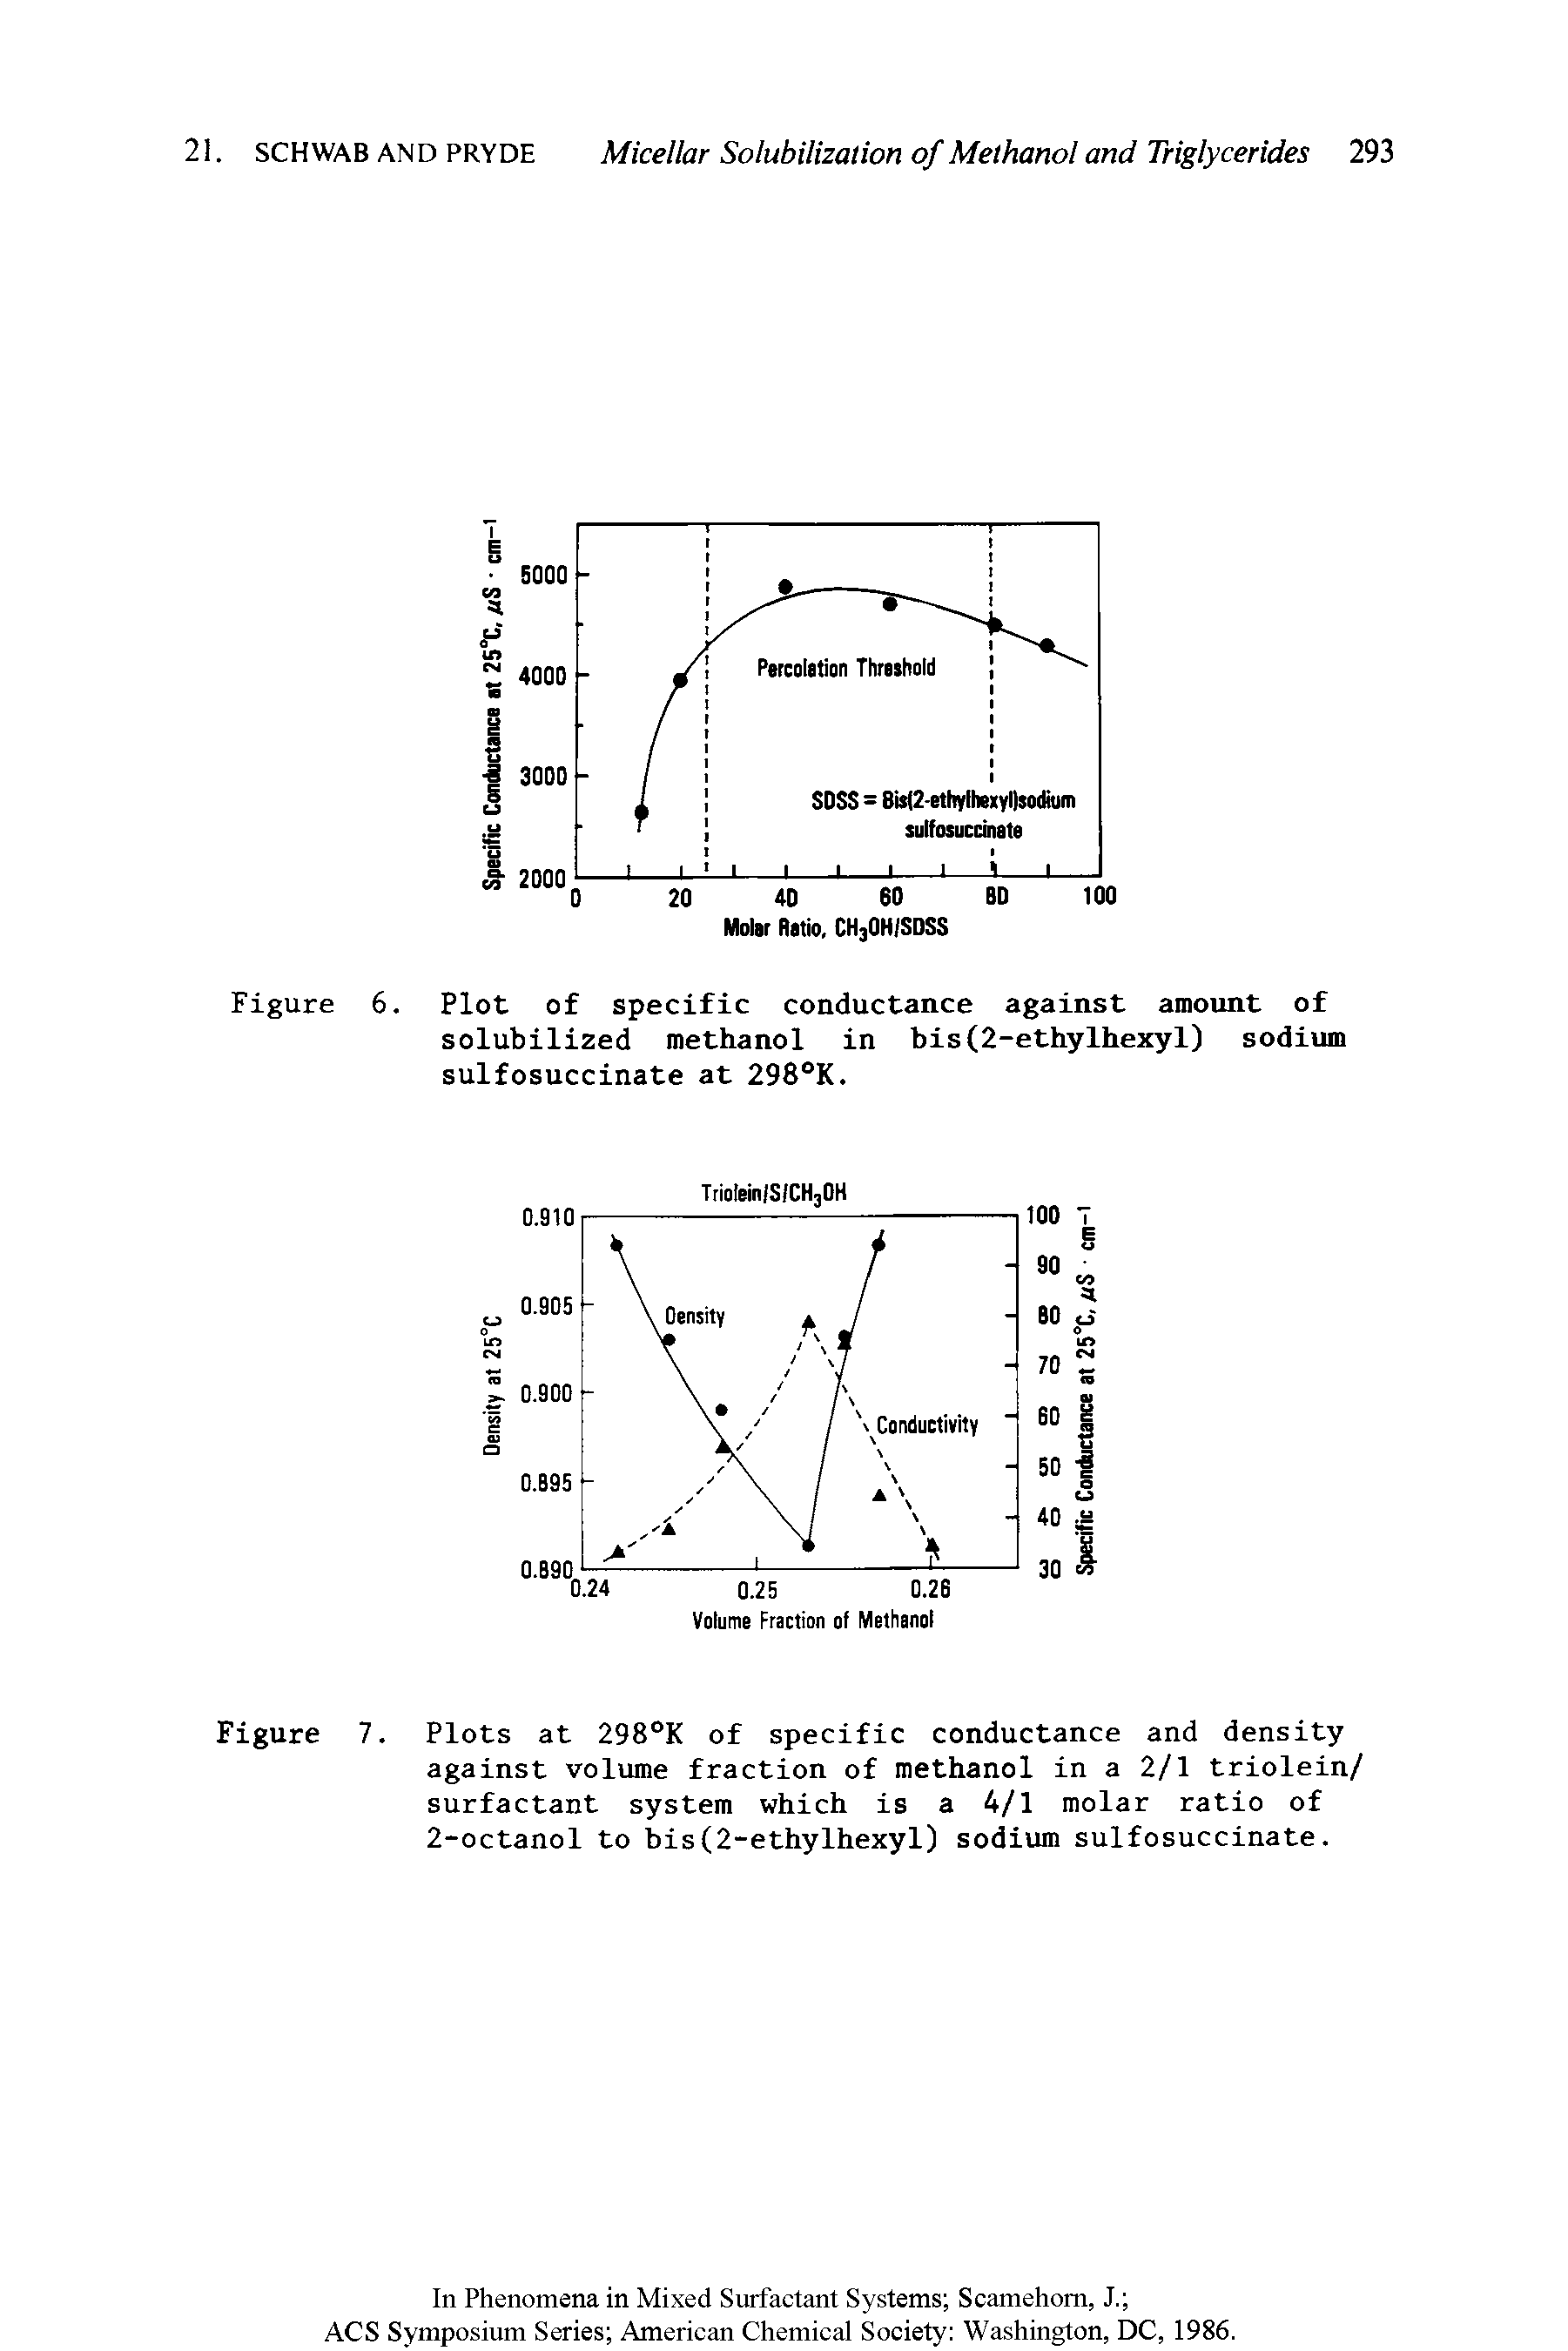 Figure 7. Plots at 298°K of specific conductance and density against volume fraction of methanol in a 2/1 triolein/ surfactant system which is a 4/1 molar ratio of 2-octanol to bis(2-ethylhexyl) sodium sulfosuccinate.